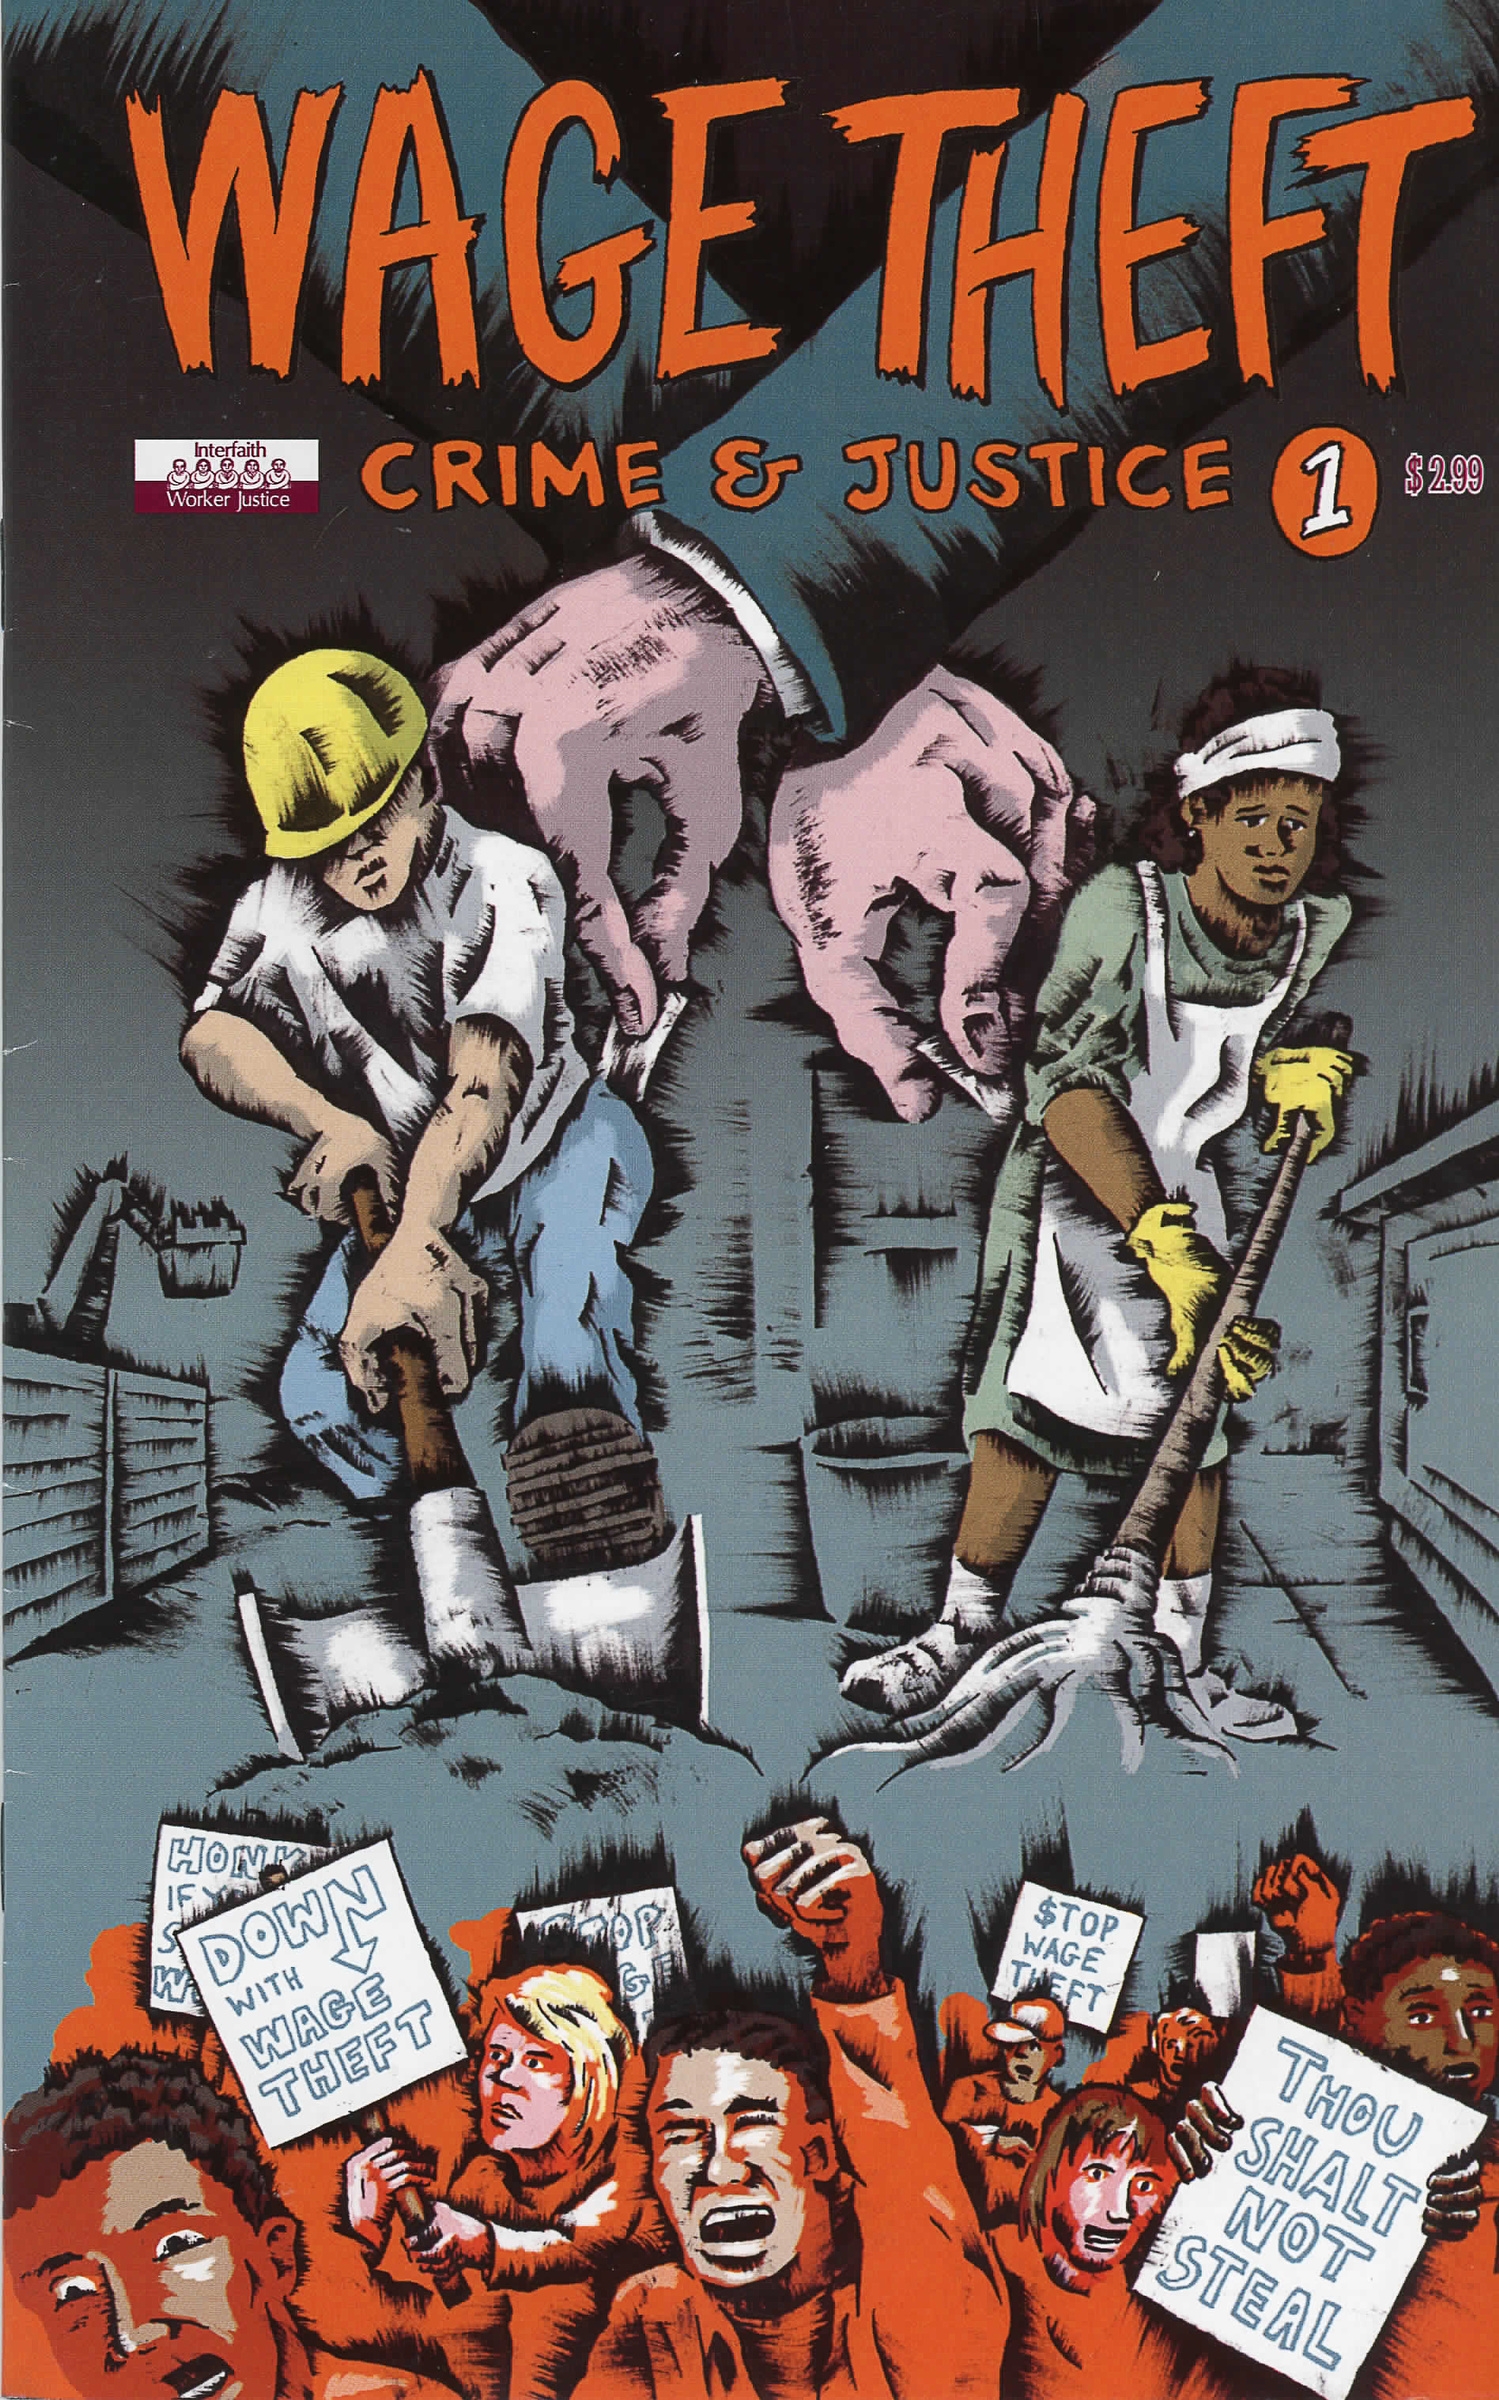 This is the cover of the comic book "Wage Theft: Crime and Justice."  Feb. 9, 2015. (CNS/Interfaith Worker Justice) 